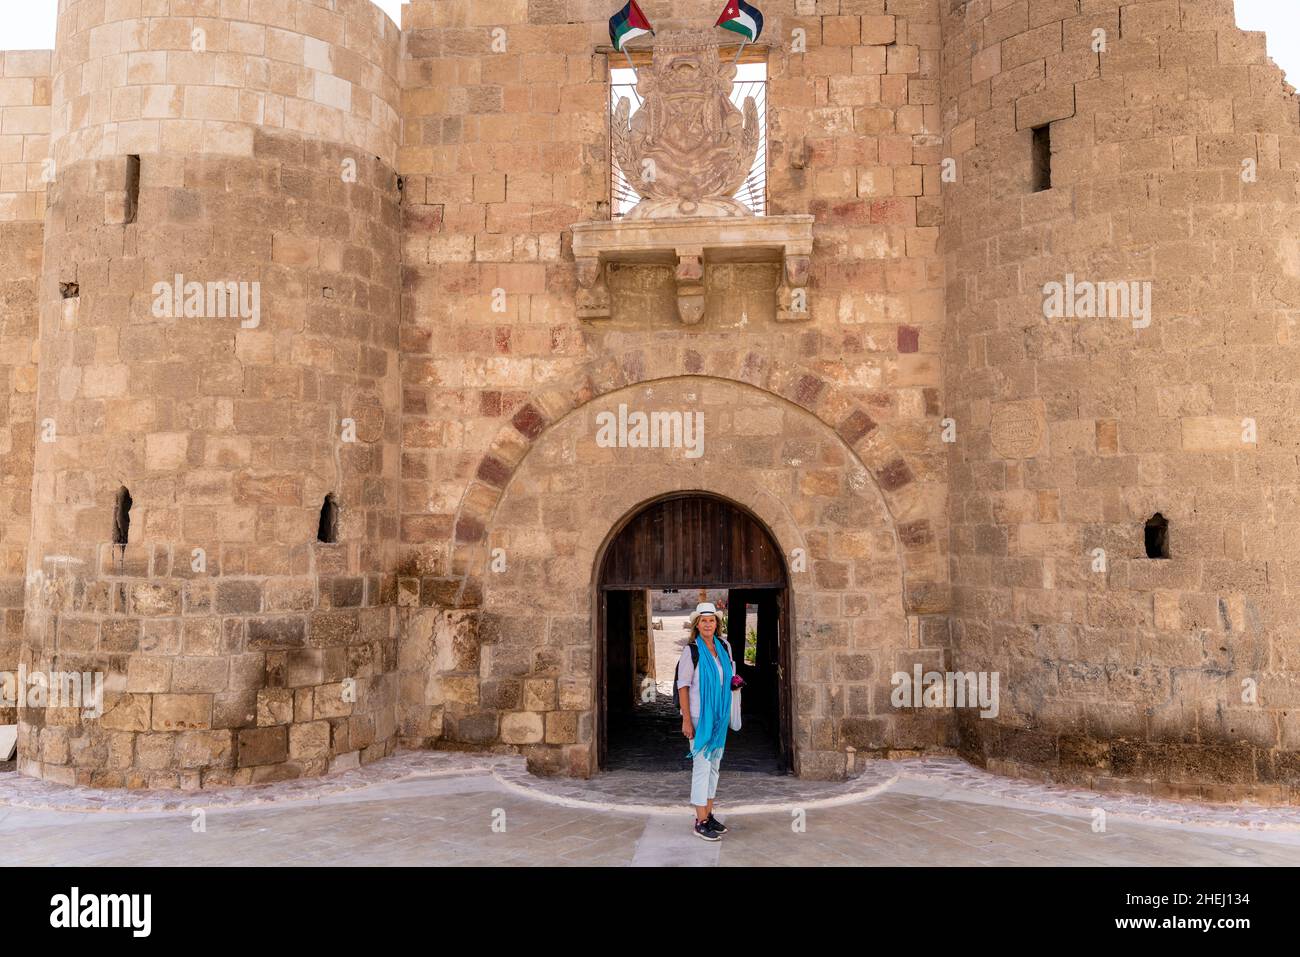 A Female Visitor Poses In Front Of The Aqaba Fort, Aqaba, Aqaba Governorate, Jordan. Stock Photo